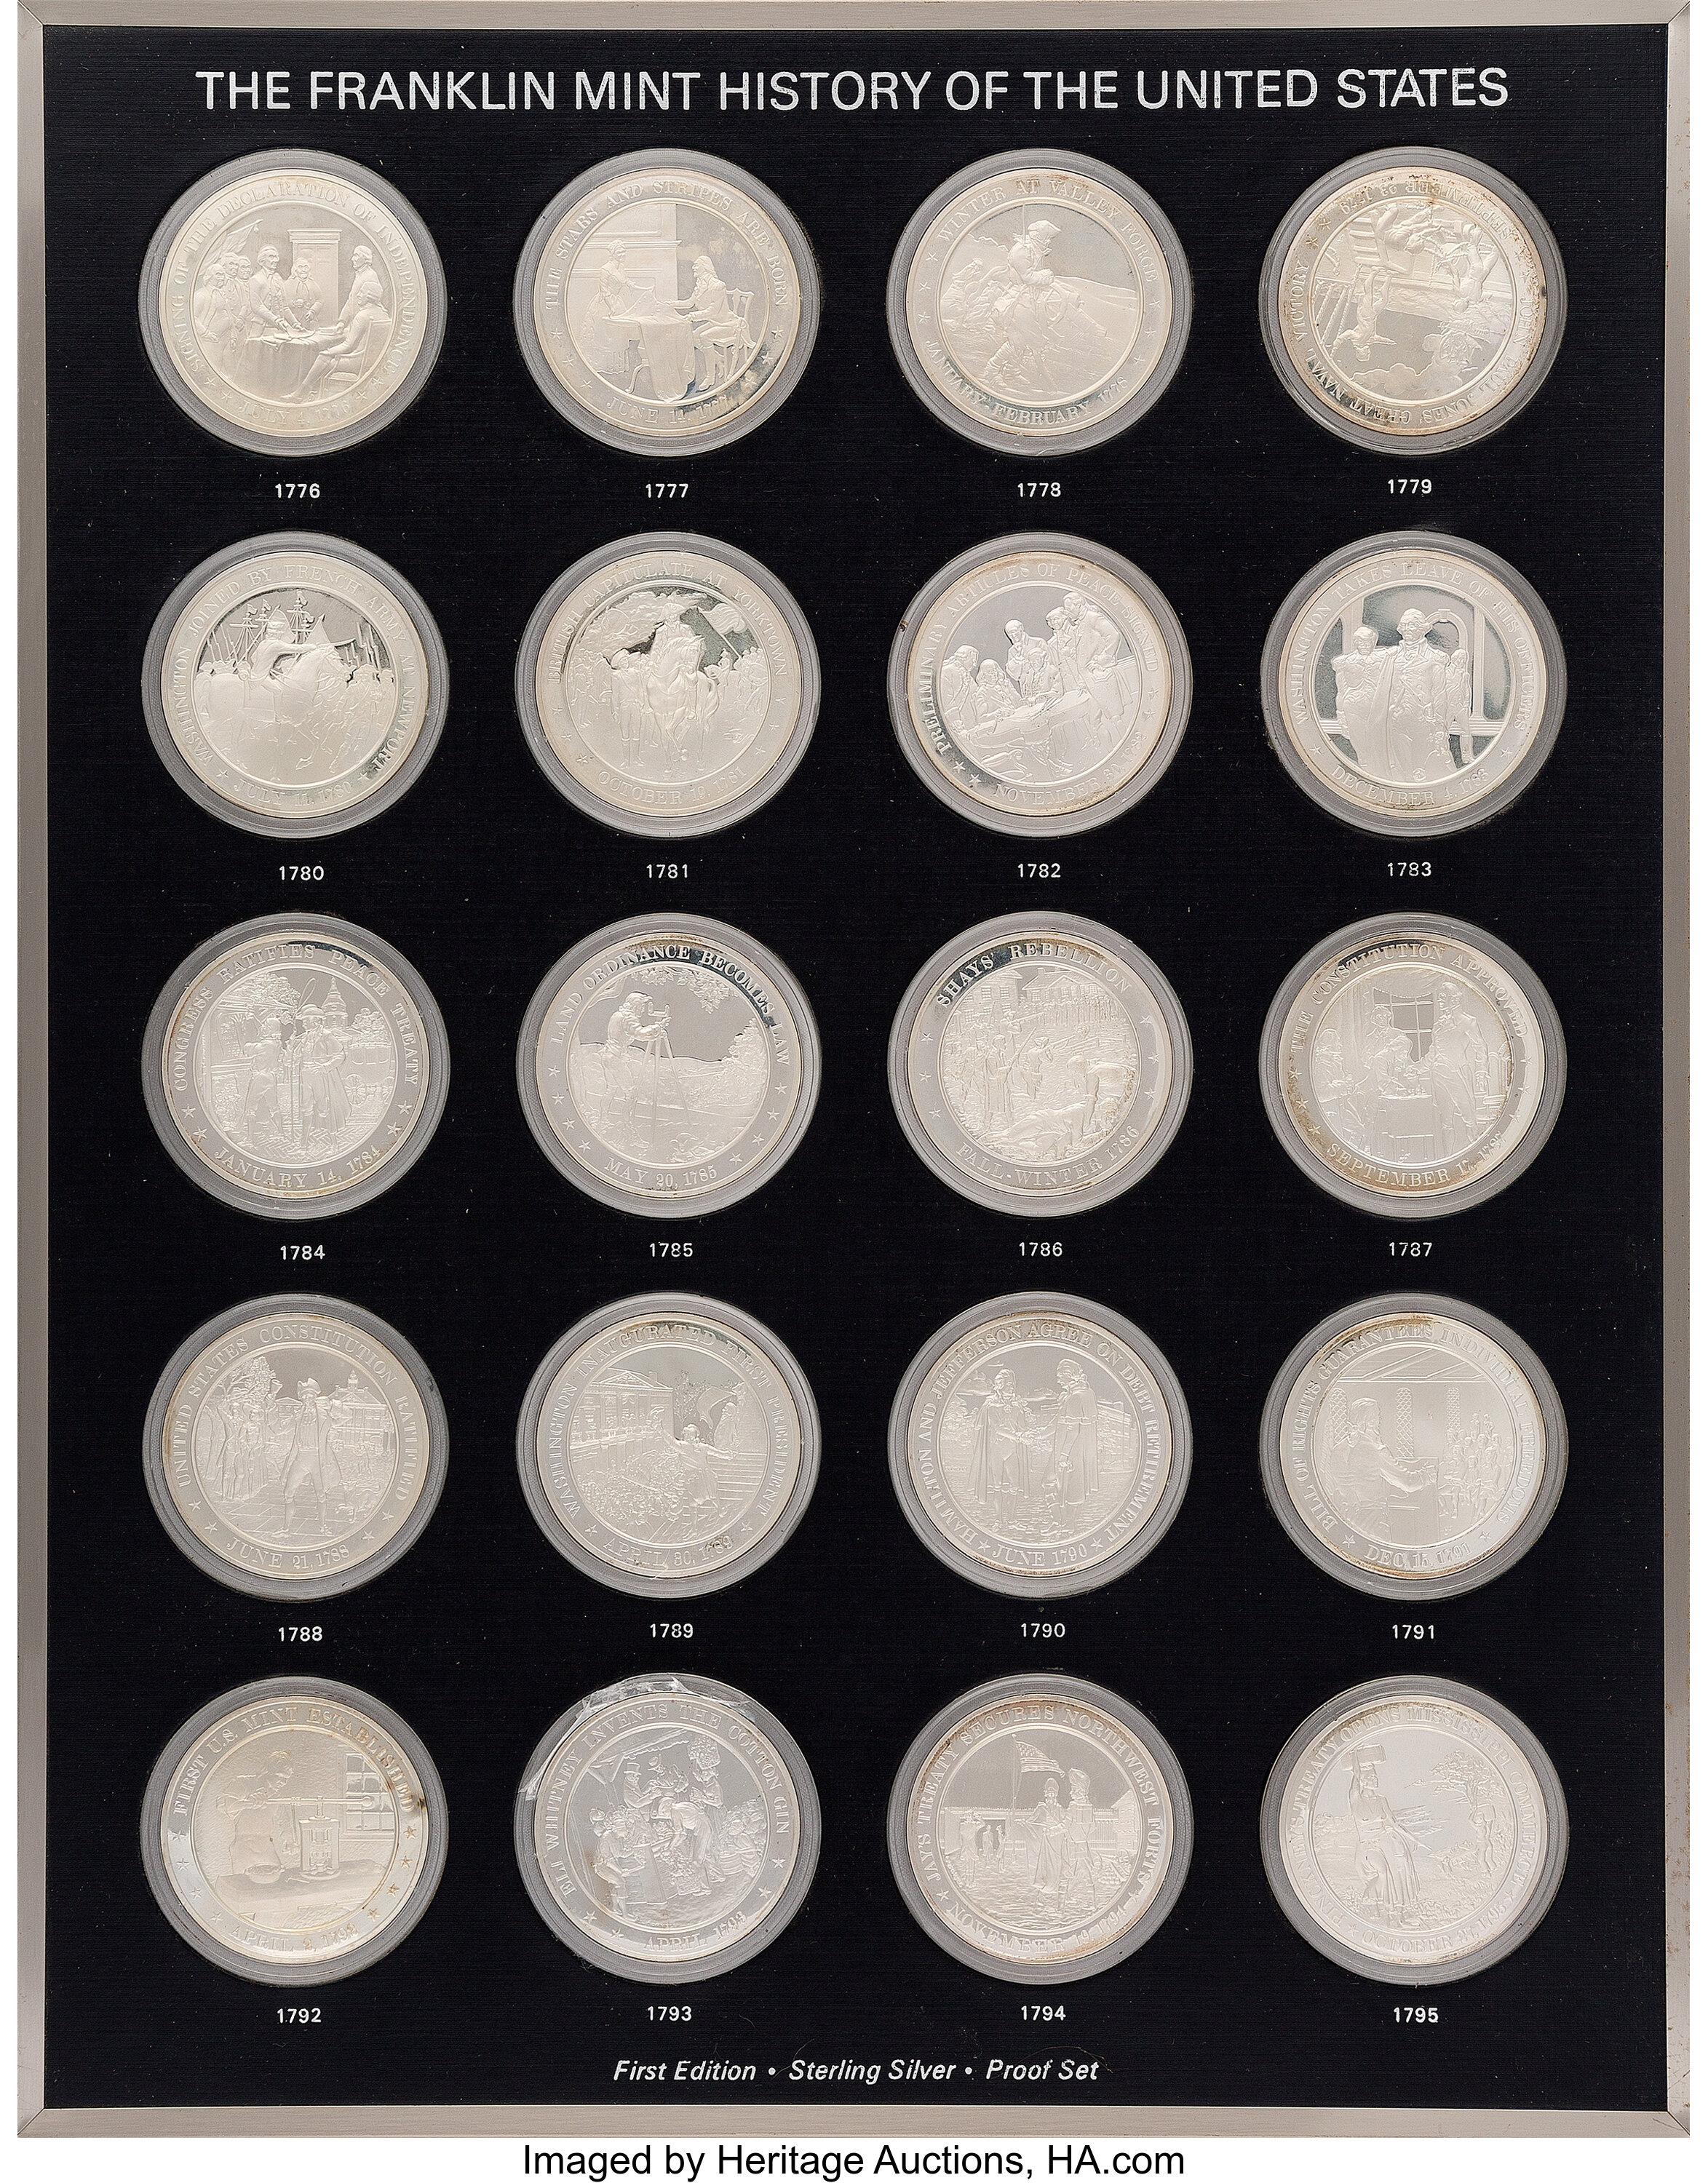 51 Popular Is franklin mint stuff worth anything Trend in This Years